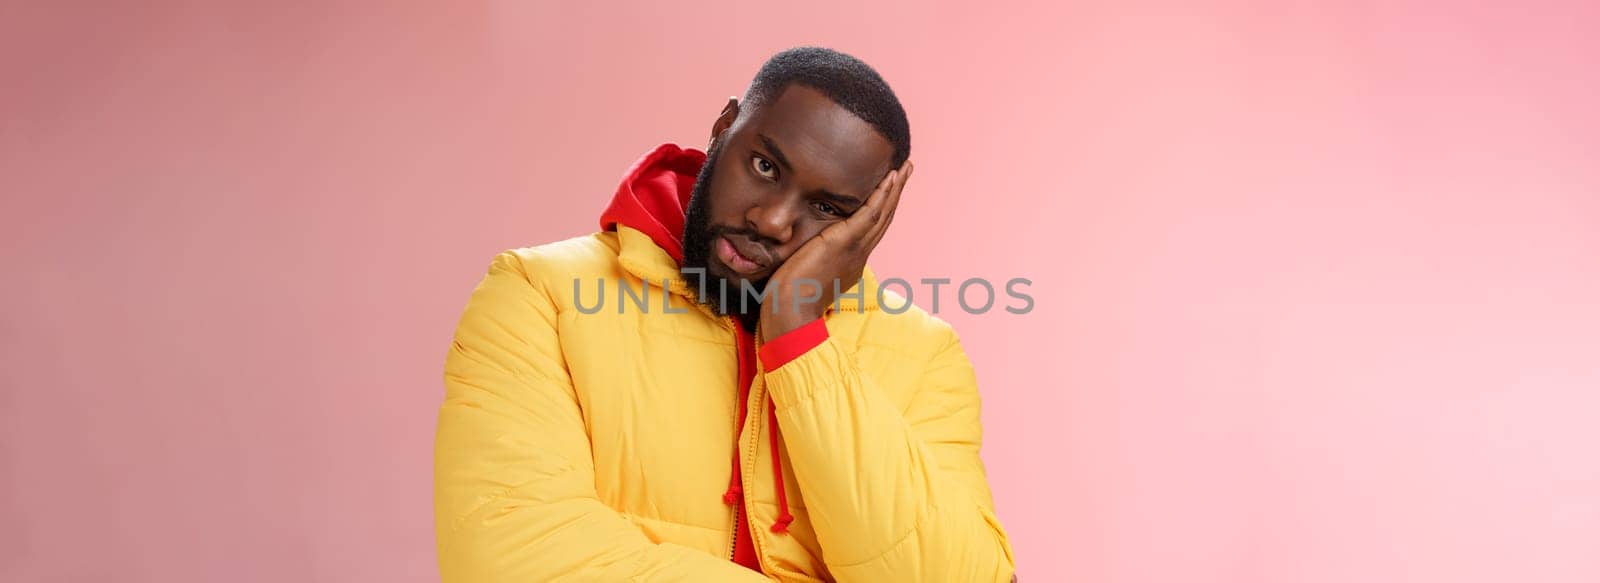 Annoyed bothered pissed african-american bearded man in yellow jacket facepalm look angry camera irritated lean head hand bored fed up pissed hearing uninteresting same stories, pink background.